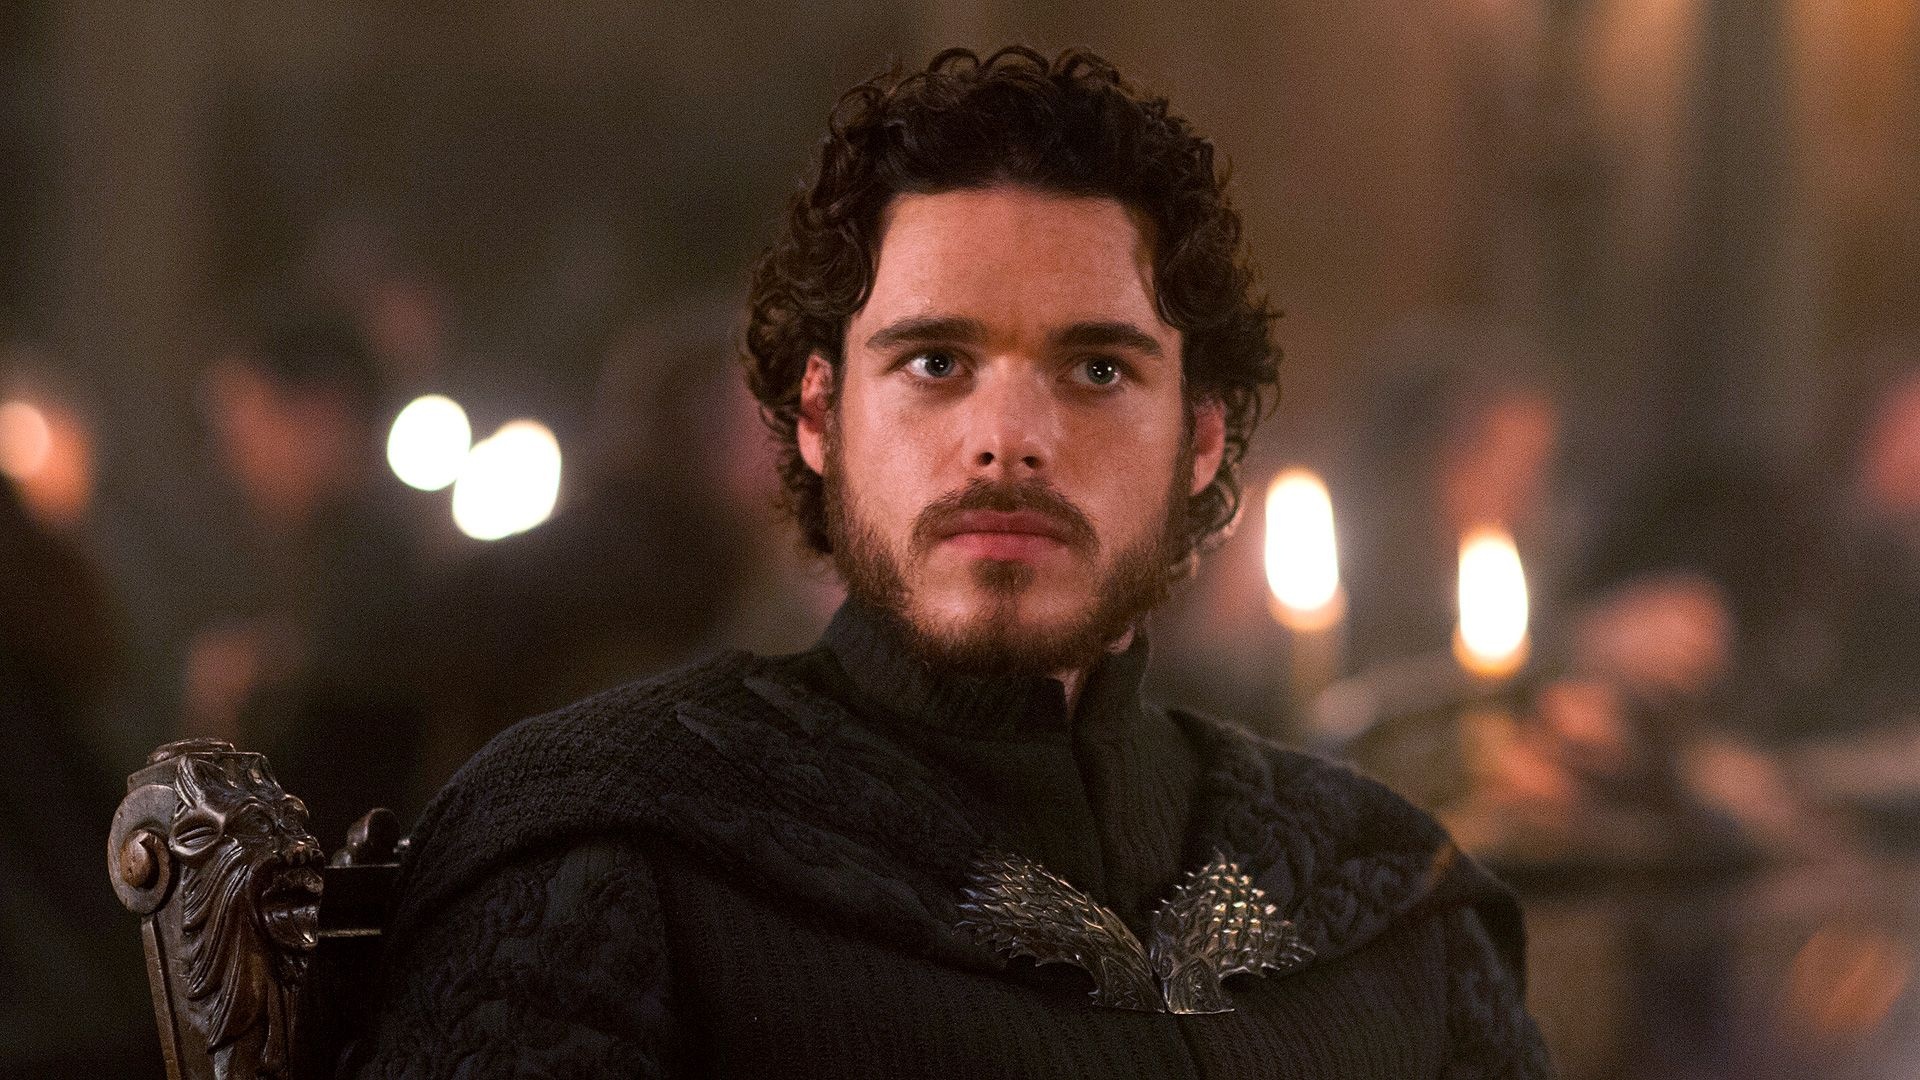 Richard Madden: The closest of companions with his half-brother Jon Snow. 1920x1080 Full HD Background.